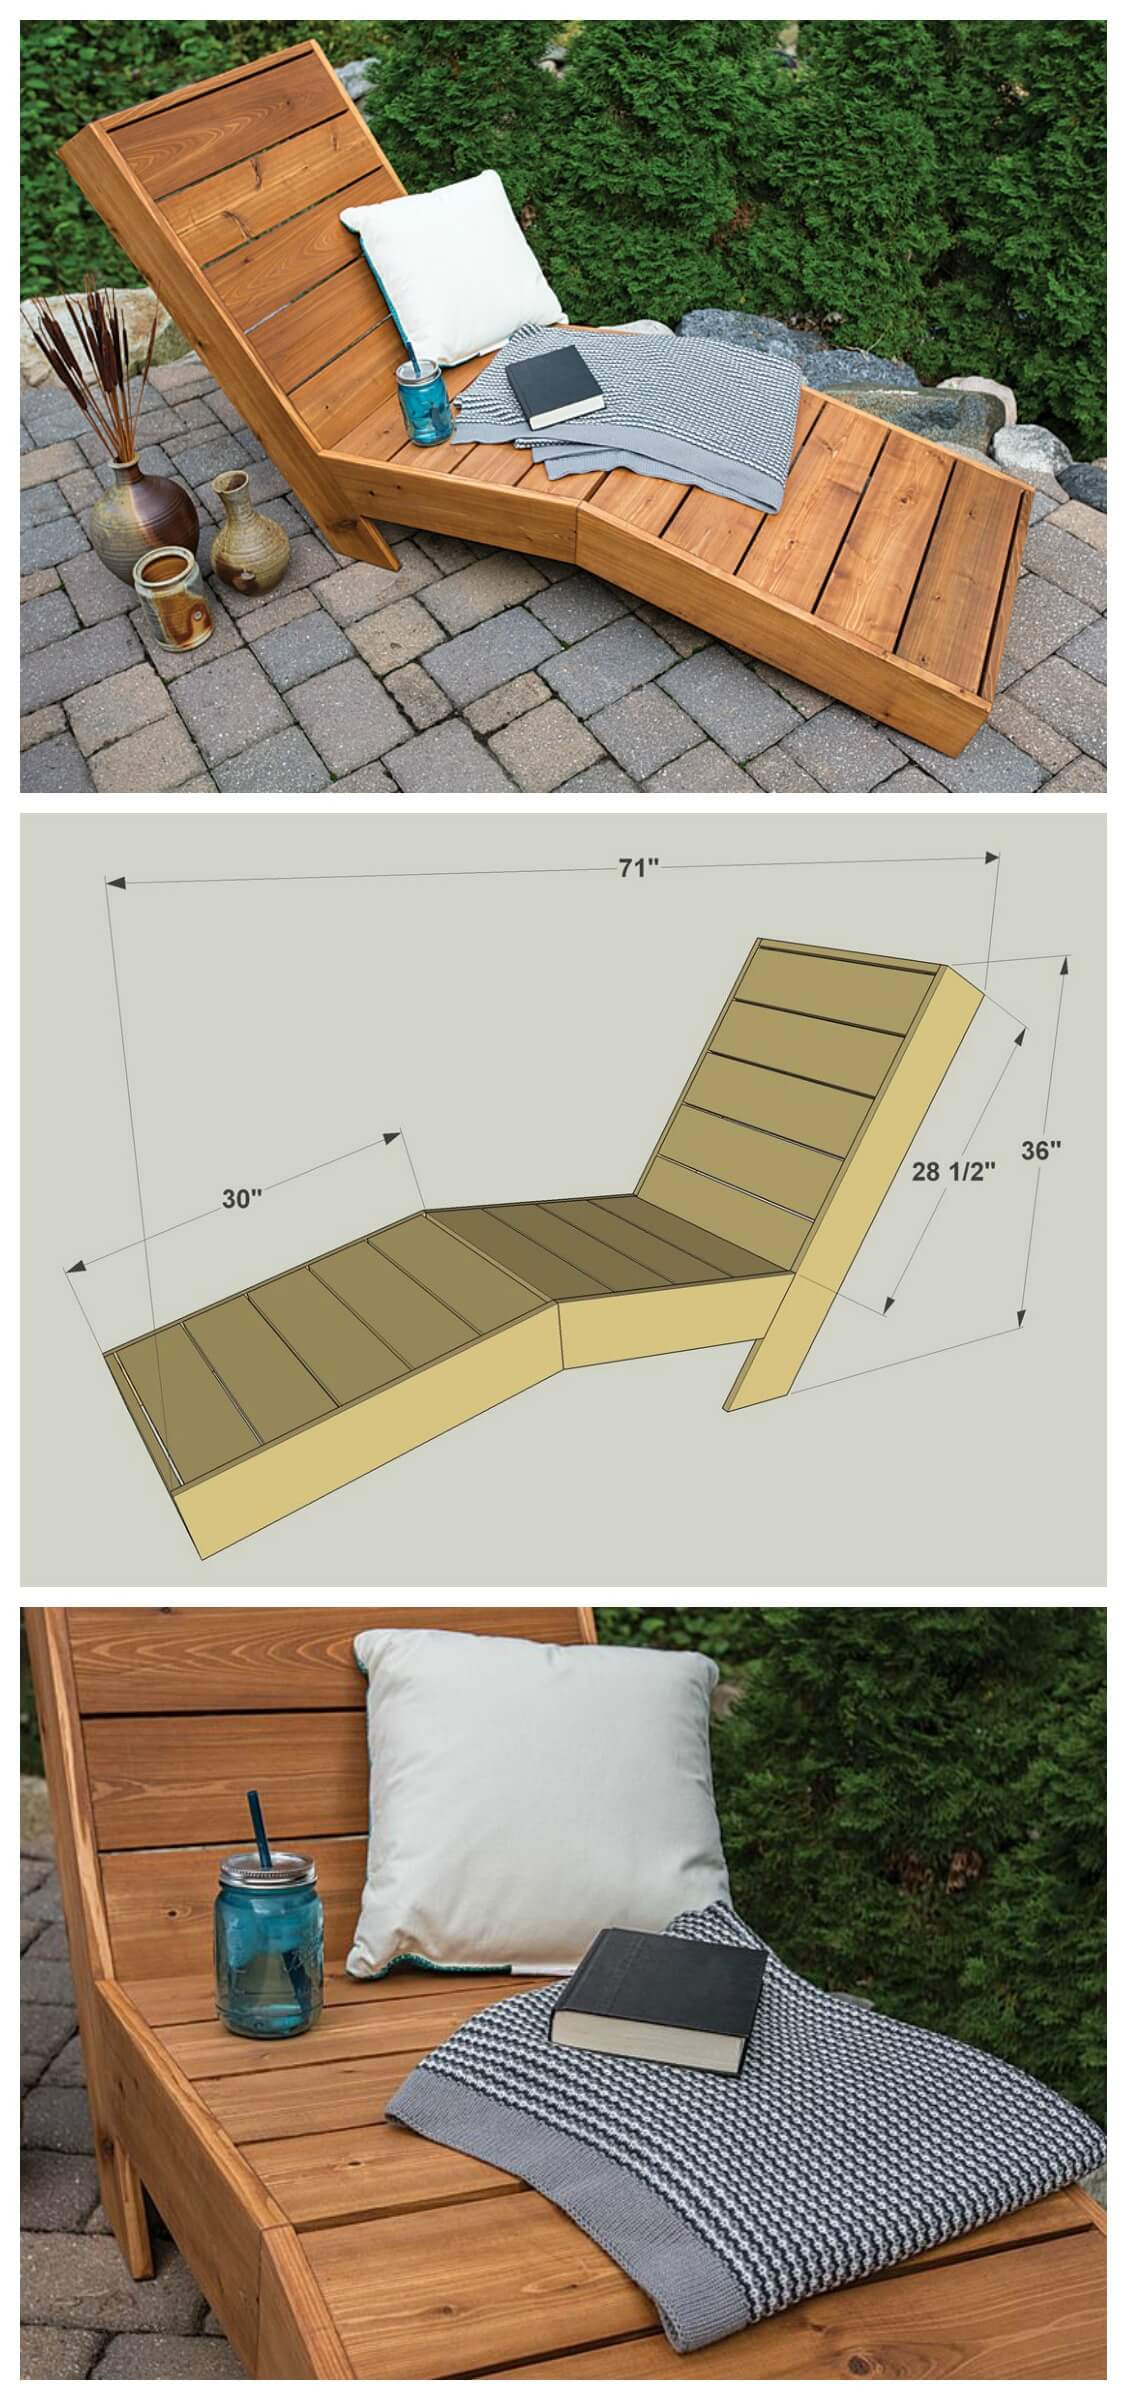 Outdoor Patio DIY
 29 Best DIY Outdoor Furniture Projects Ideas and Designs